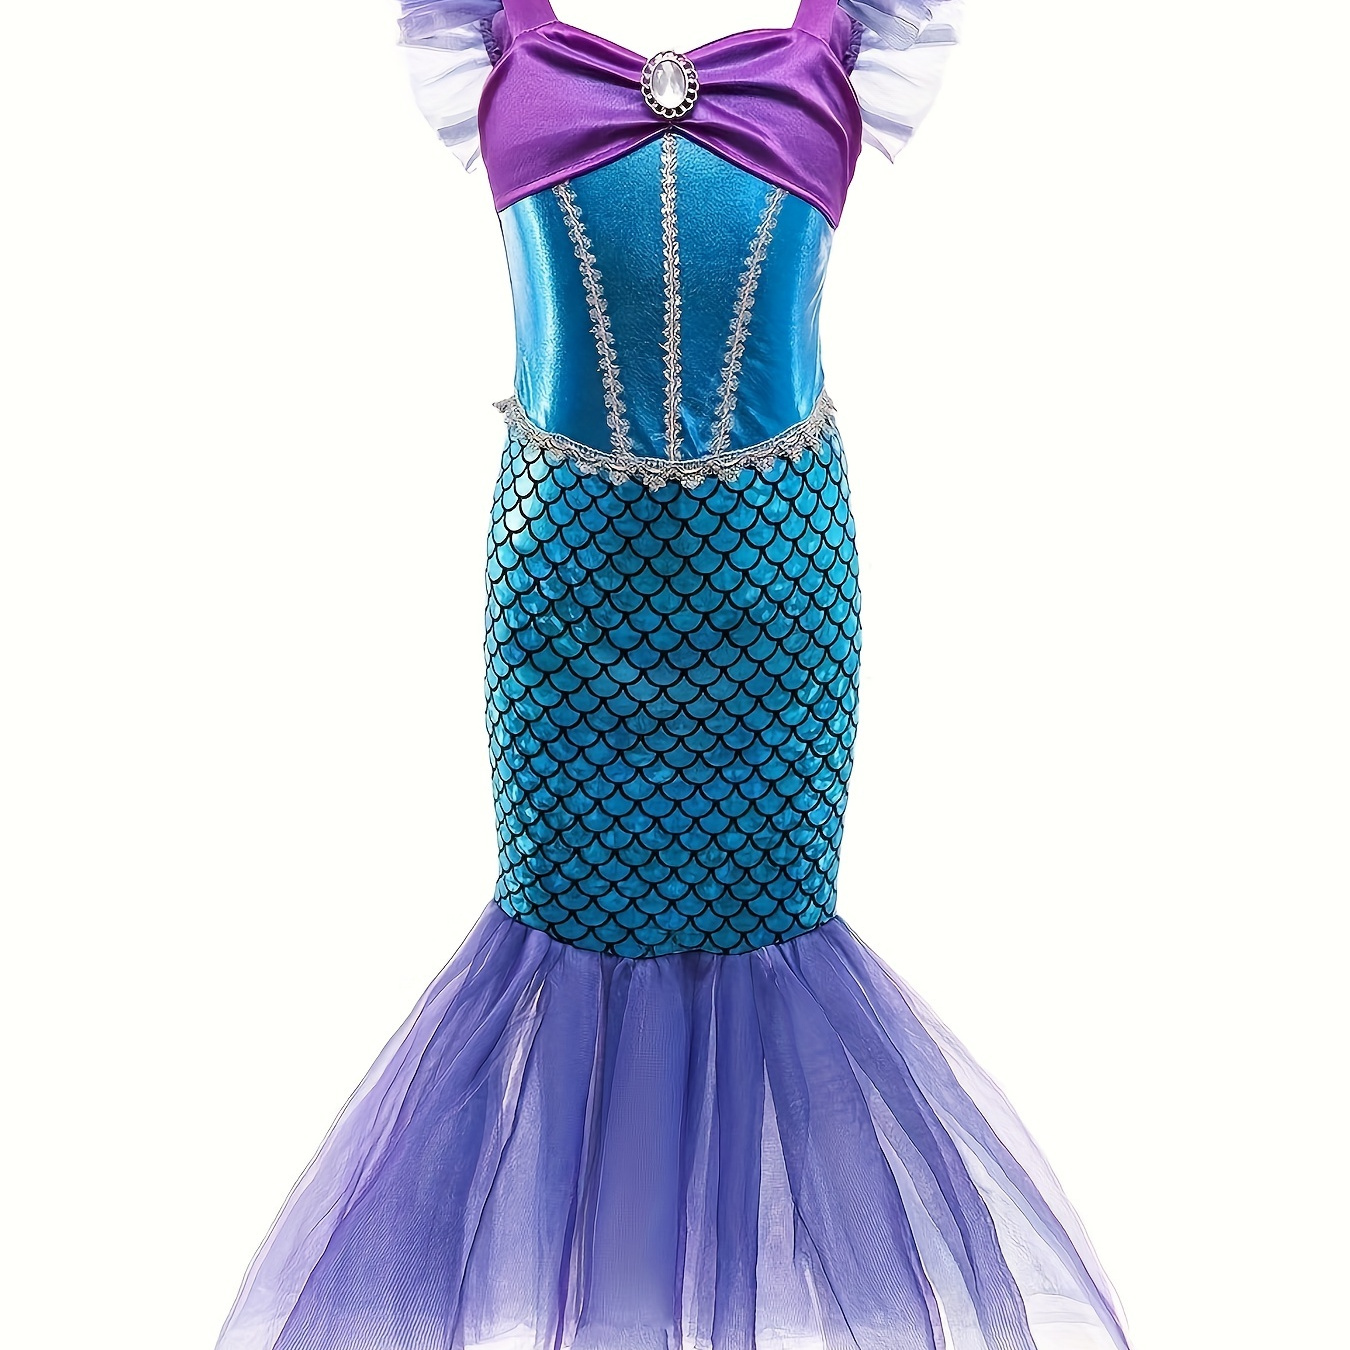 

Girl's Mermaid Princess Mesh Dress, Lovely Cartoon Character Style Dress, Girl's Clothing For Birthday Party Photography